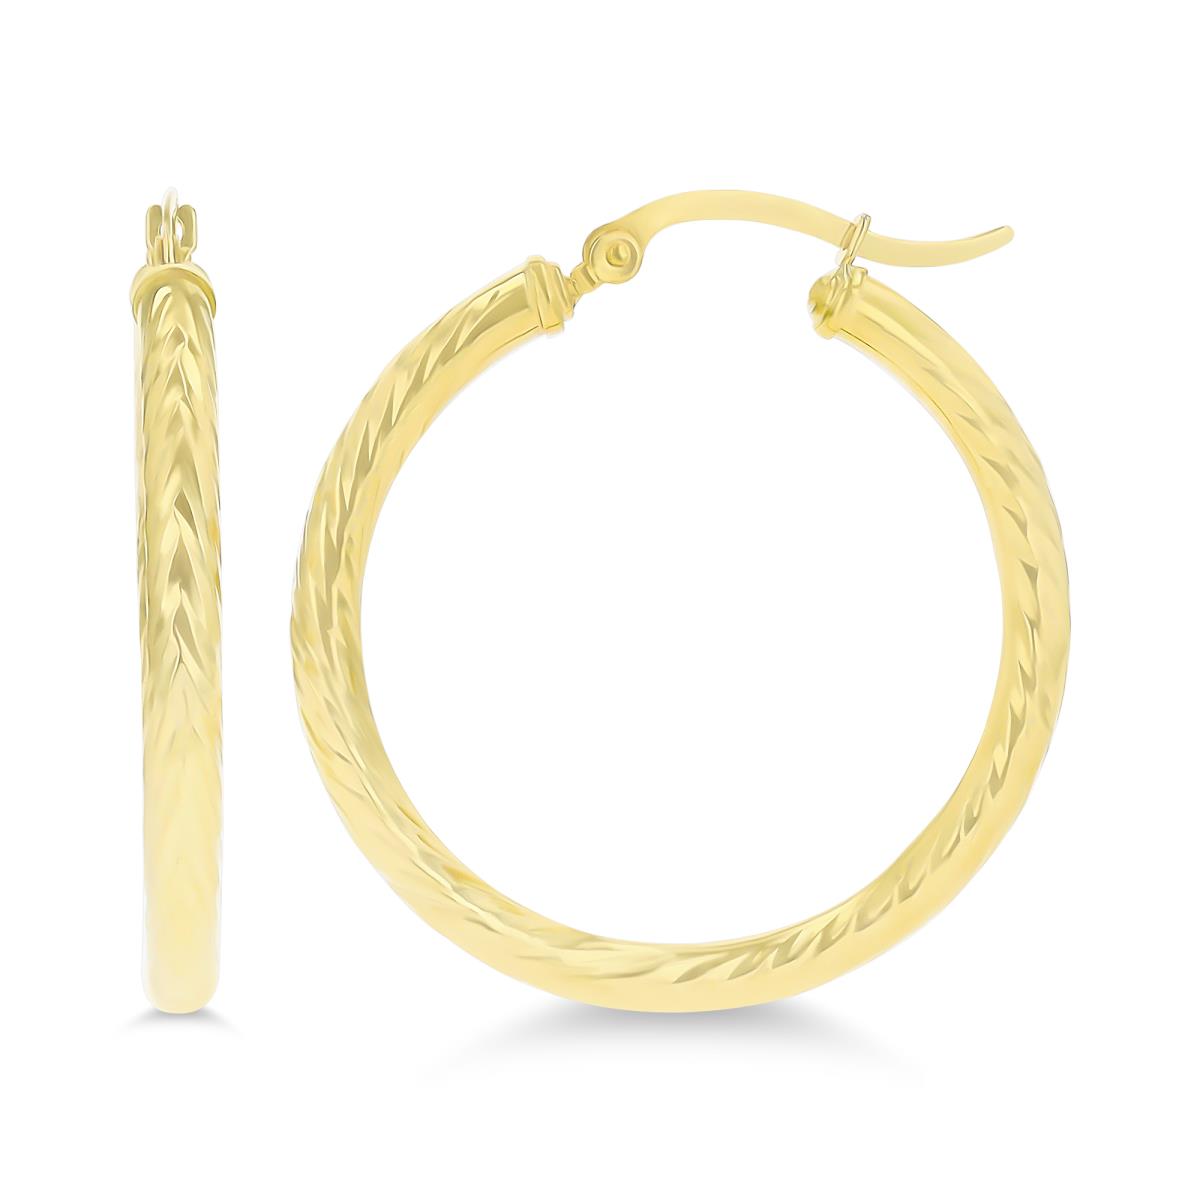 14K Yellow Gold 25x3mm (1.00") Twisted DC Hoop Earring